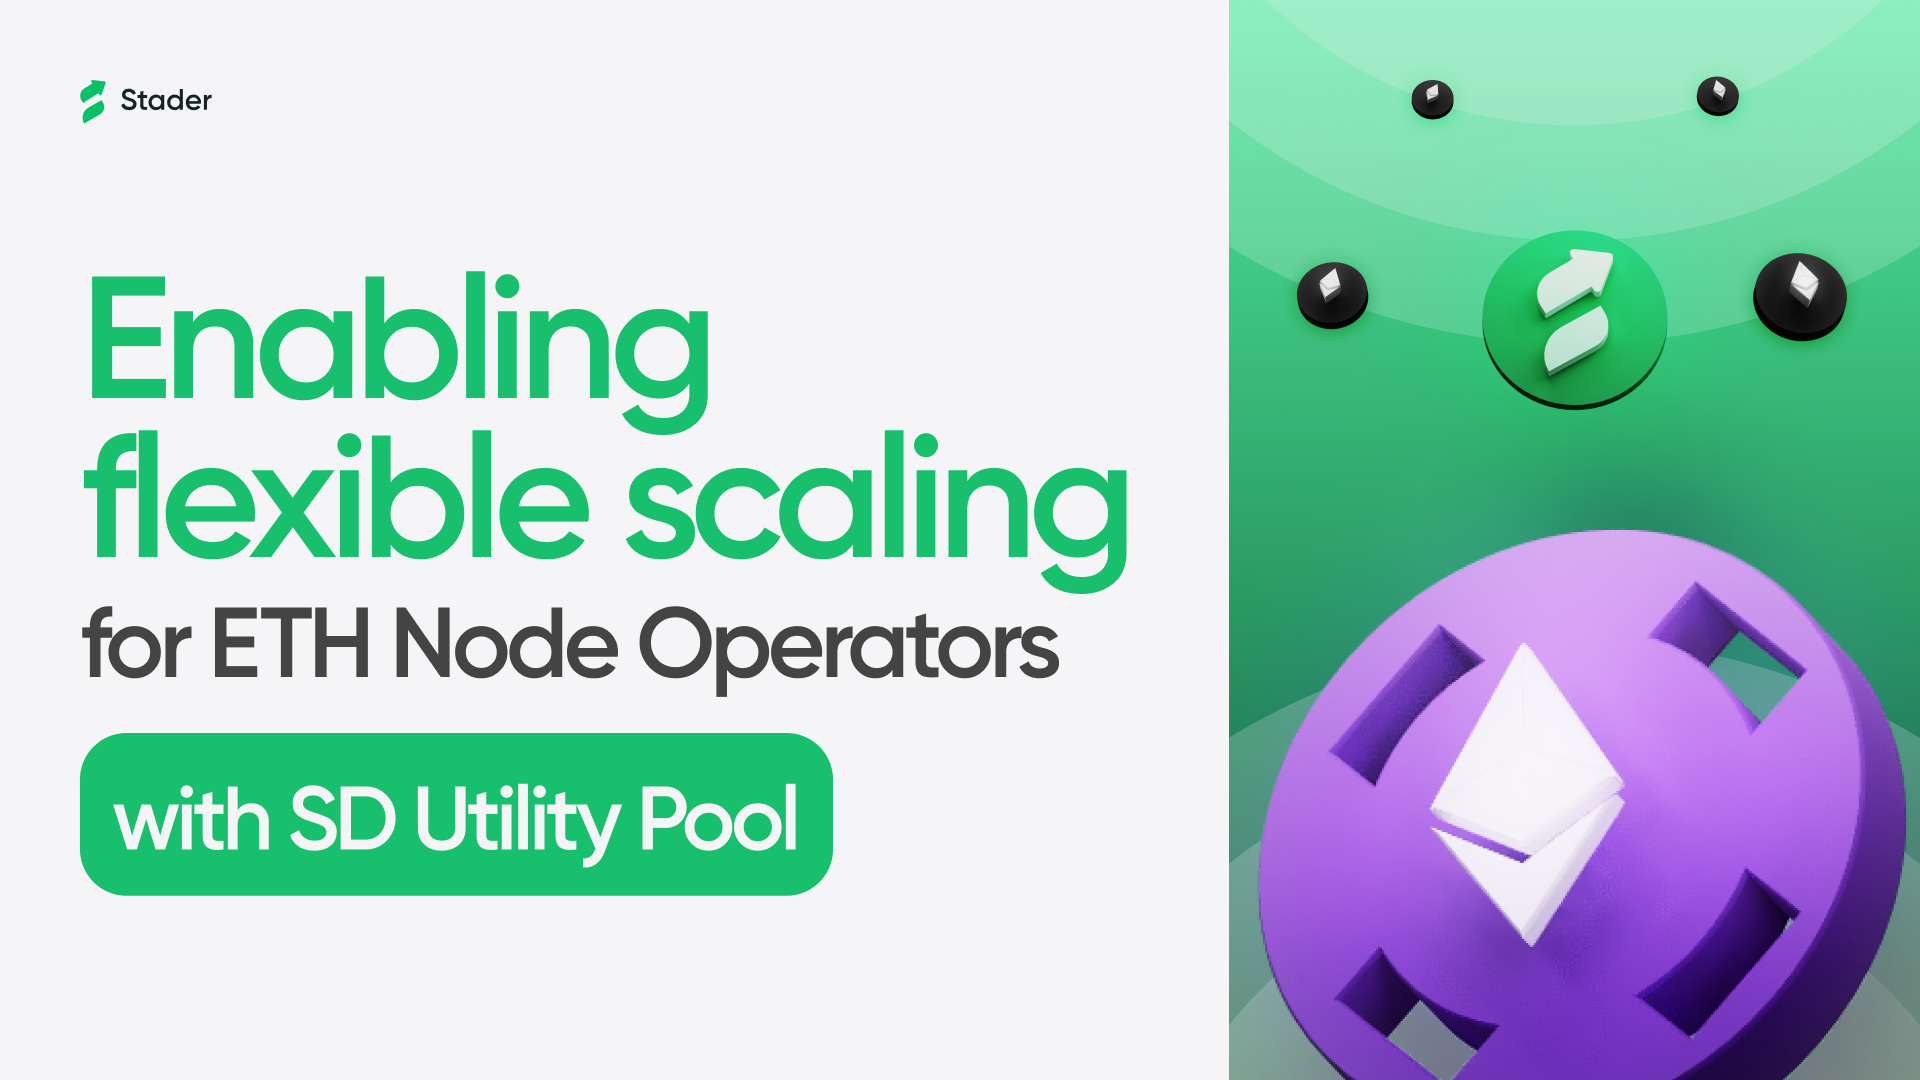 SD Utility Pool: Economics of spinning ETH-only ETHx nodes